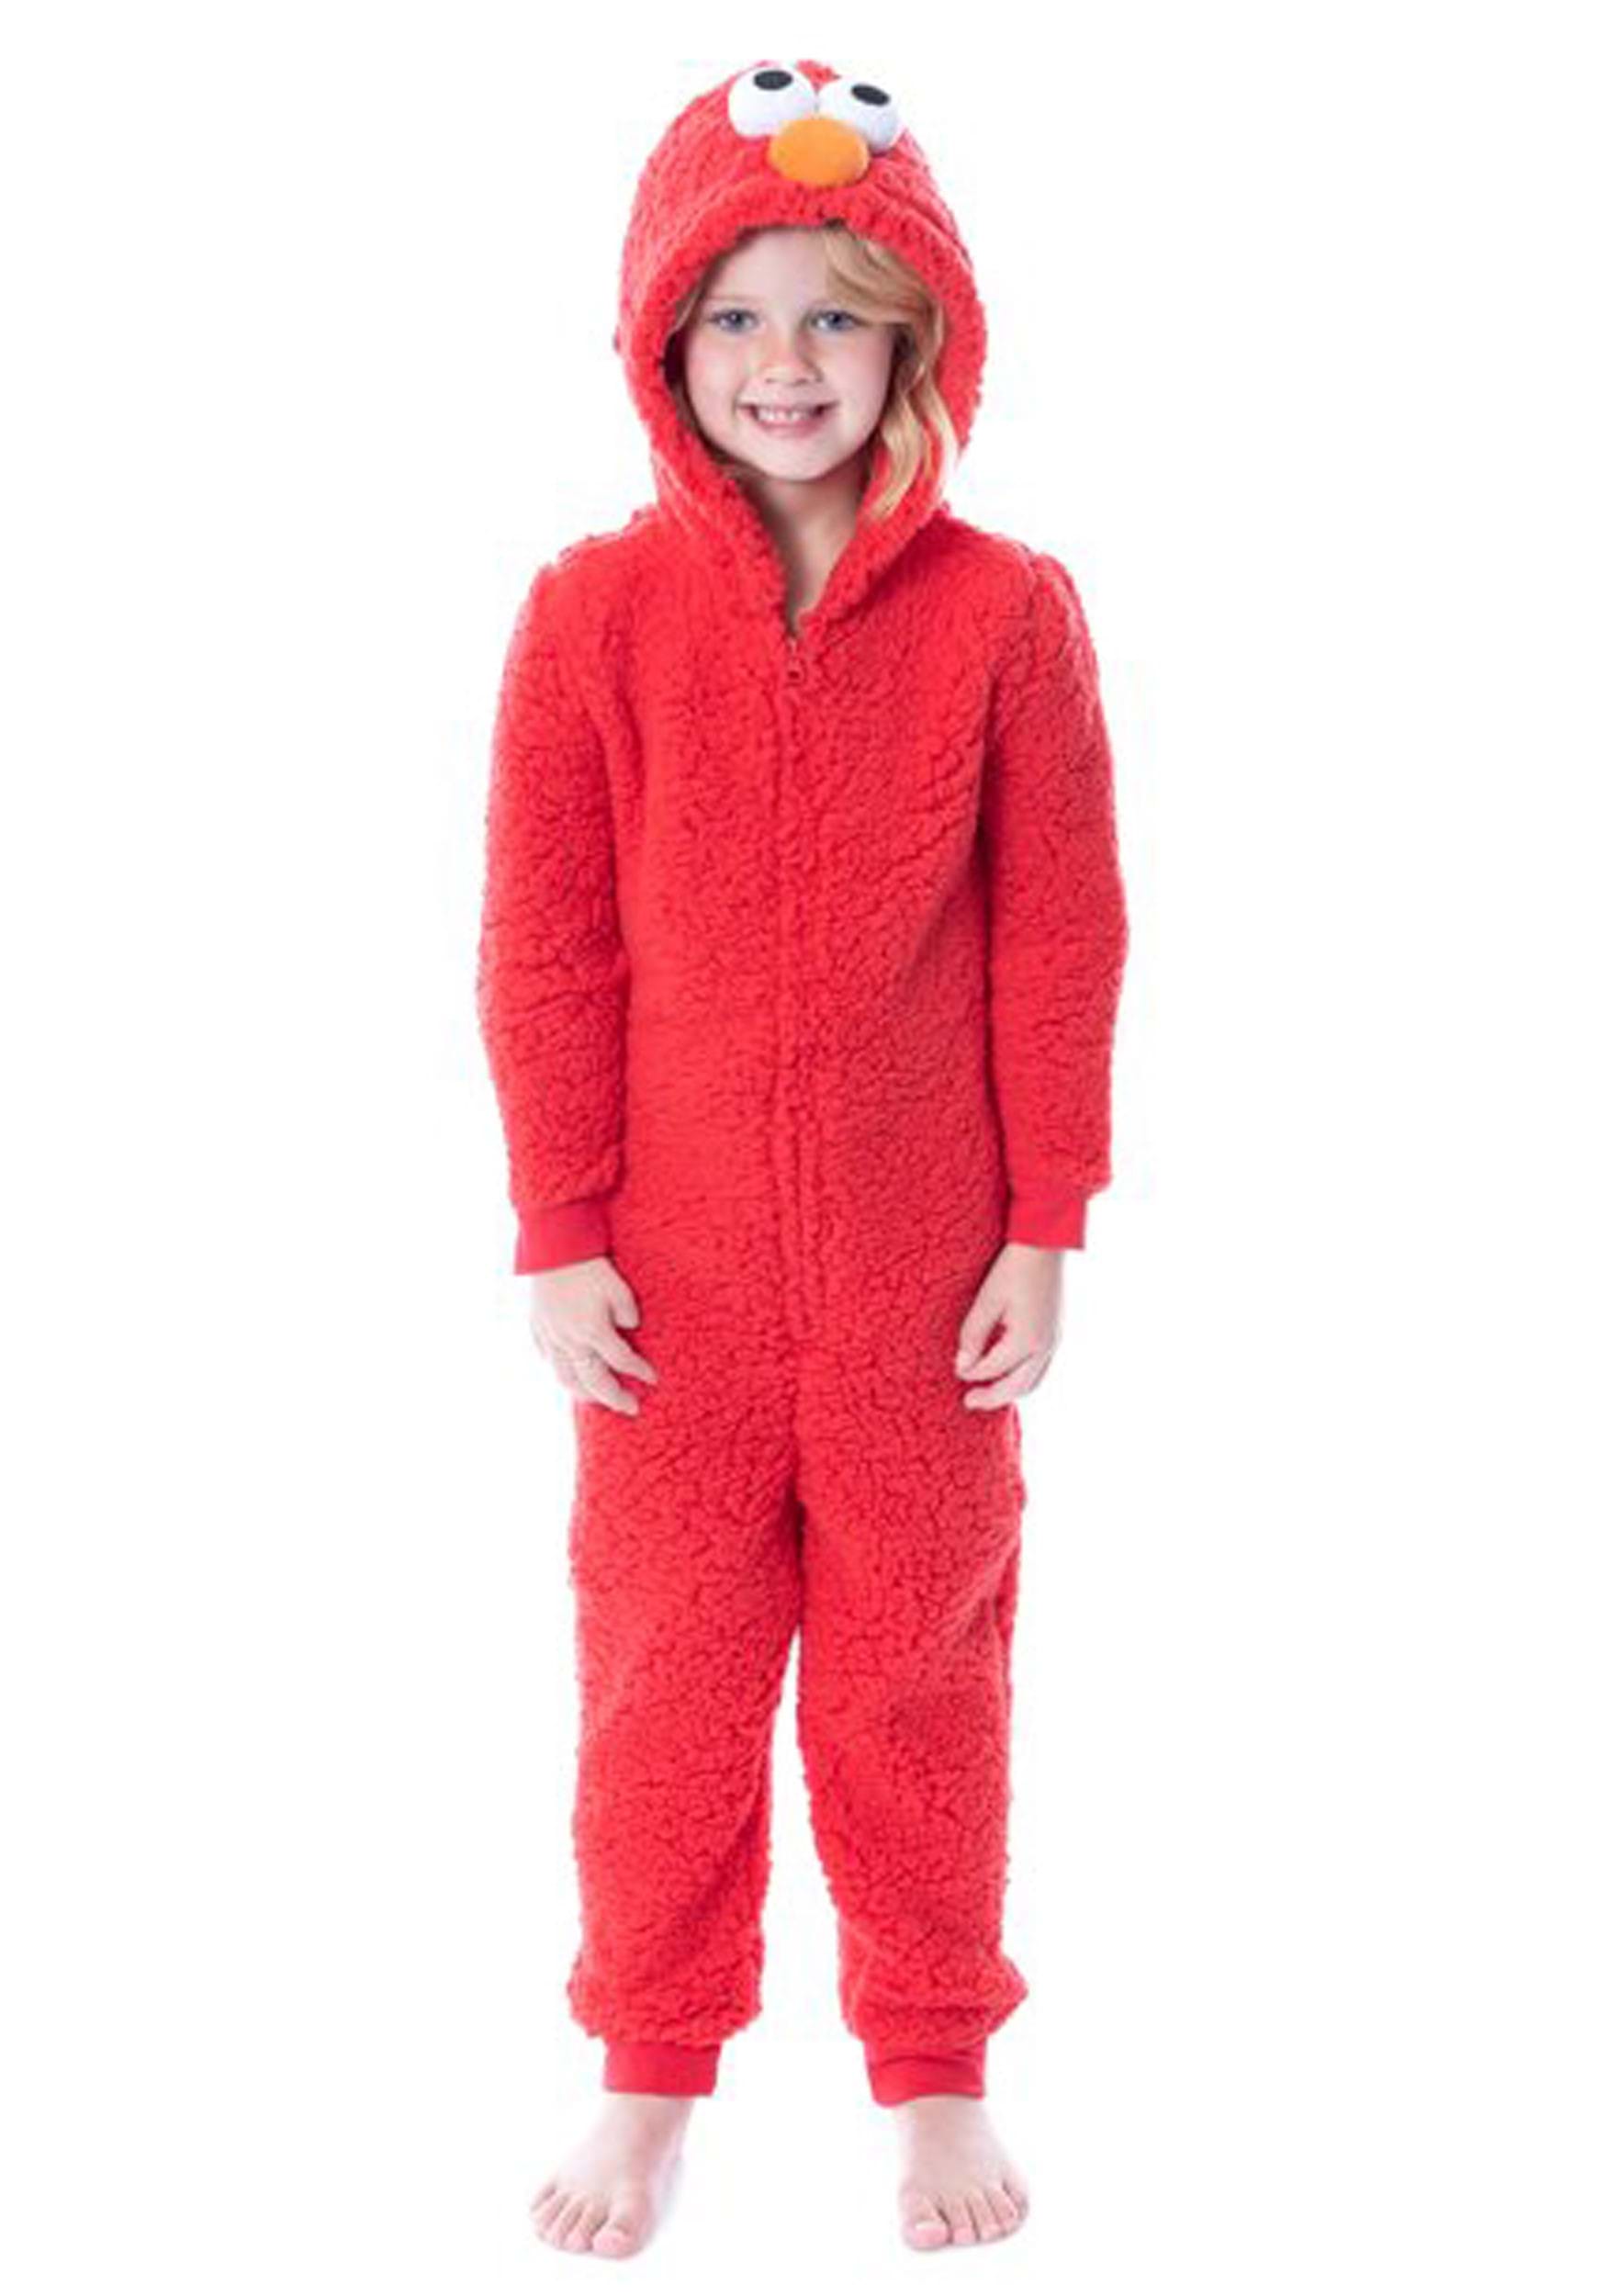 Elmo Union Suit for Toddlers